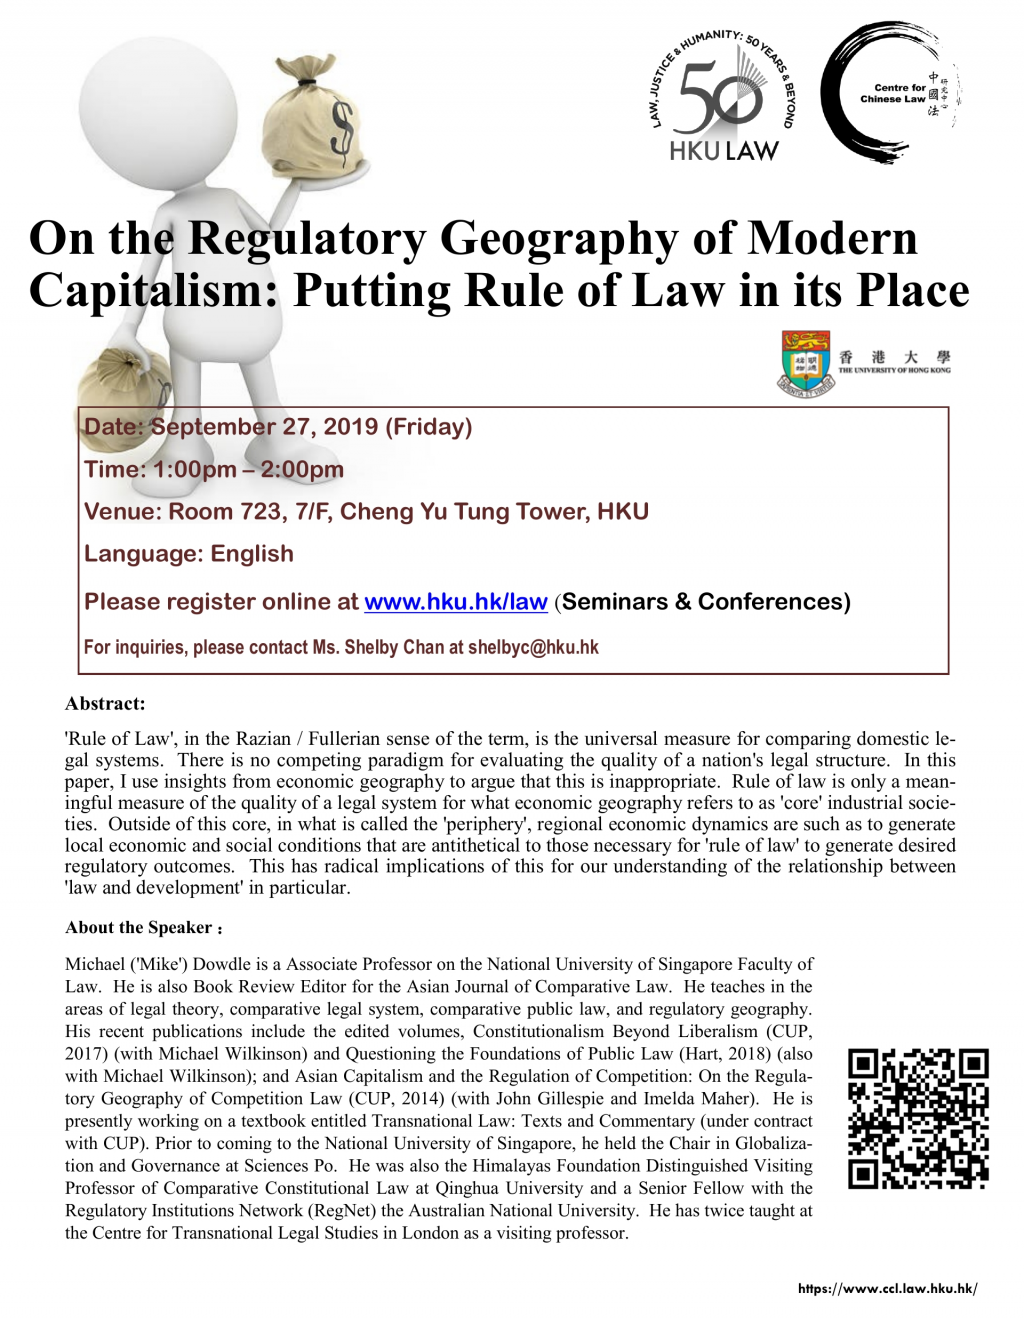 On the Regulatory Geography of Modern Capitalism: Putting Rule of Law in its Place